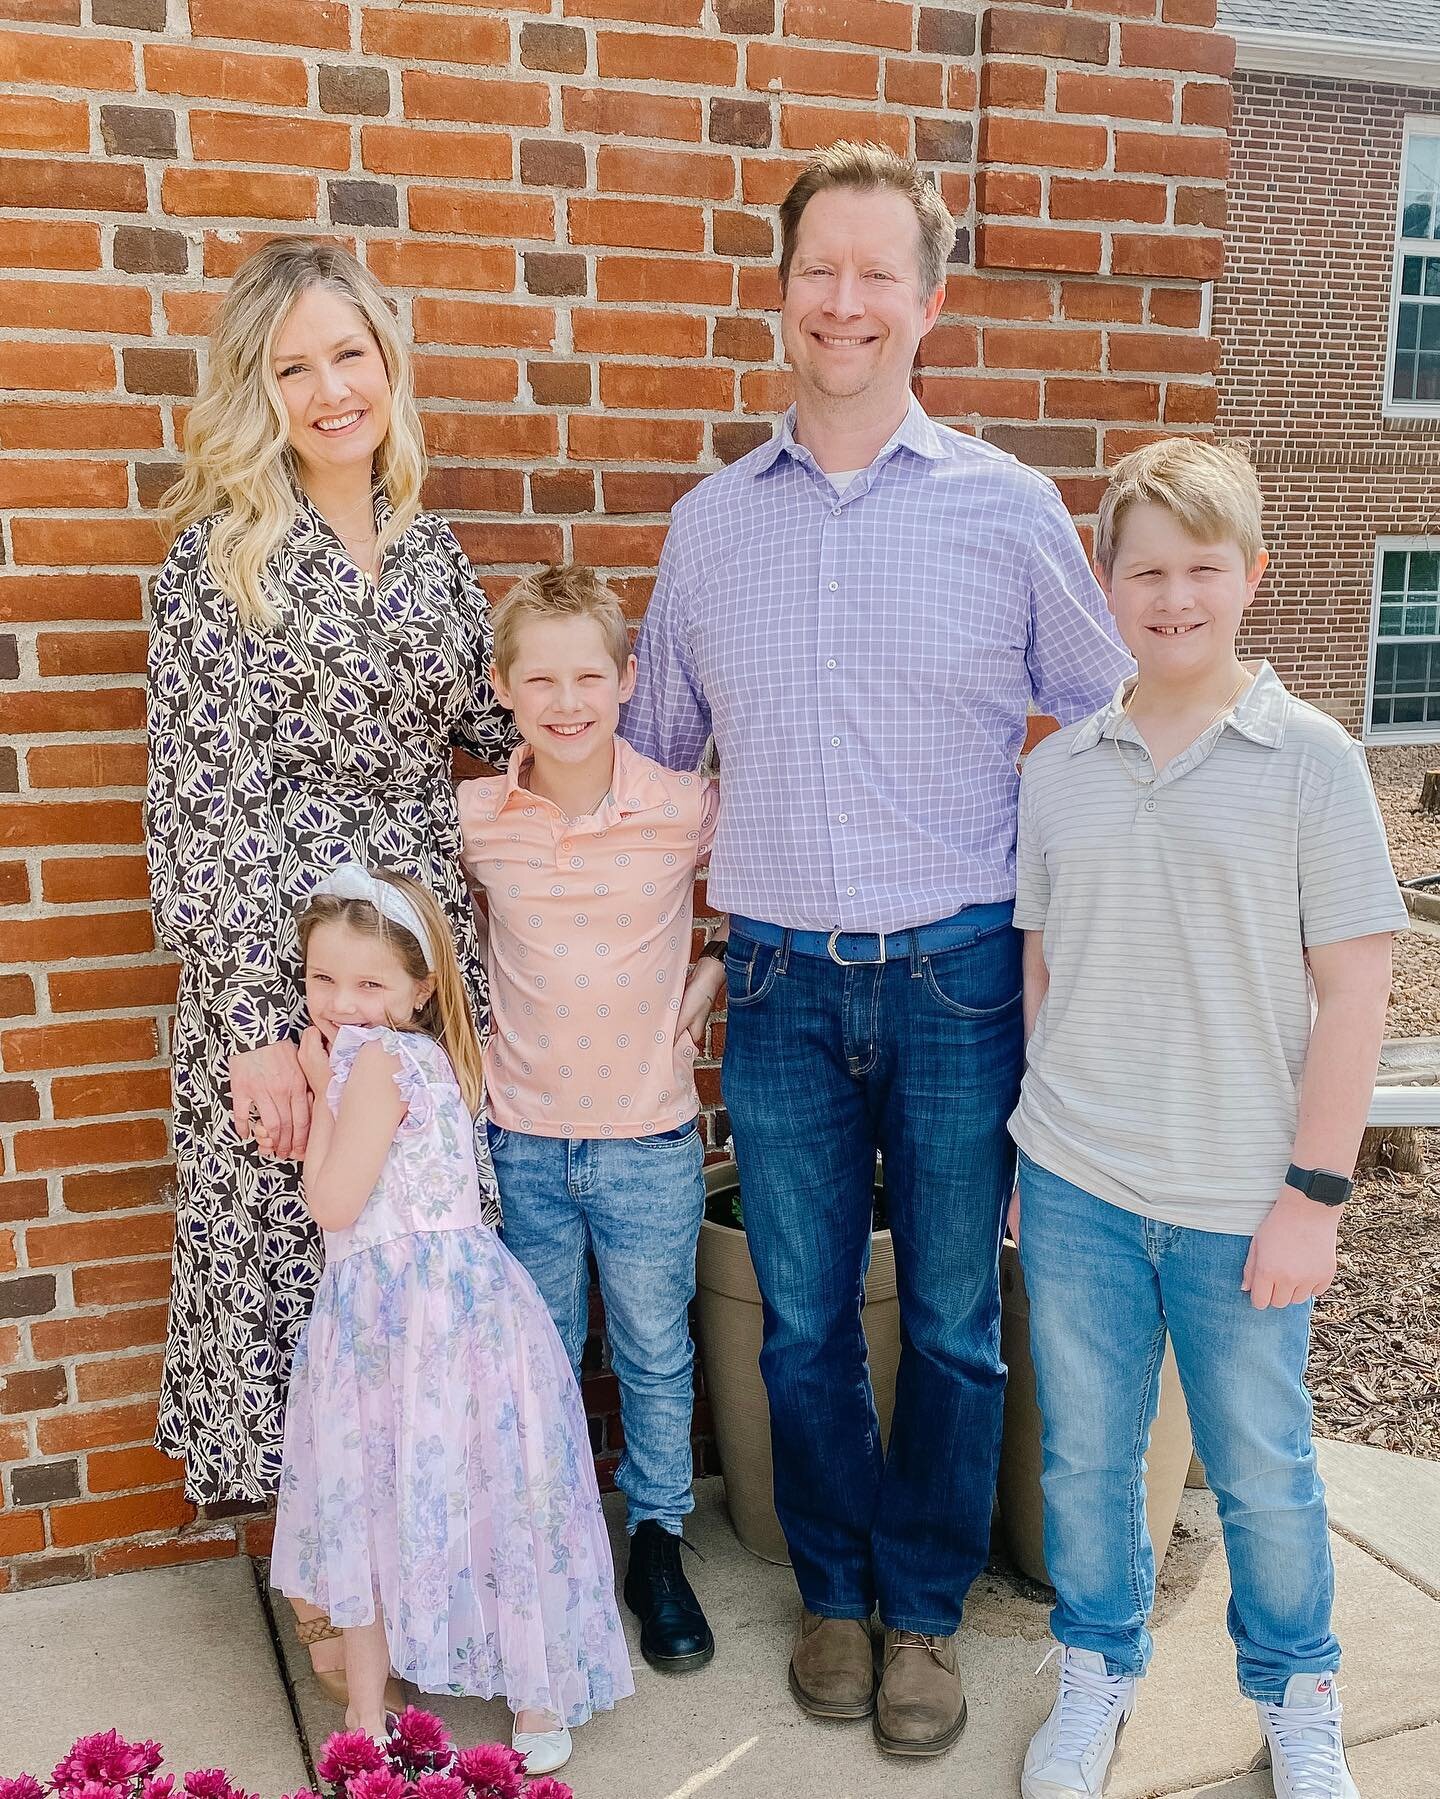 Hearts full of gratitude on this day of celebration&mdash;Jesus is risen!  Happy Easter from my family to yours!